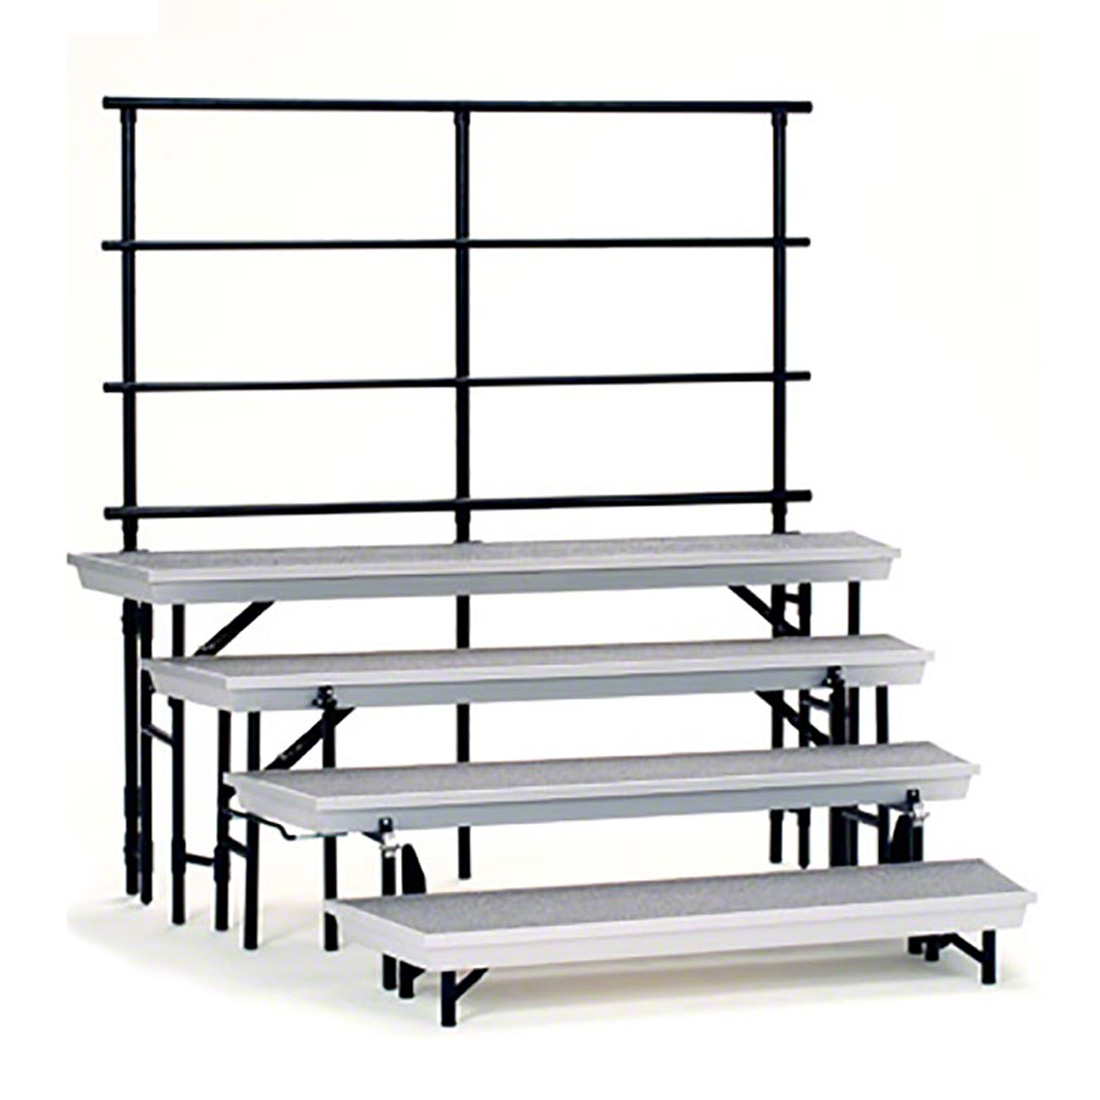 Guard Rails For Portable Performance Stages By National Public Seating